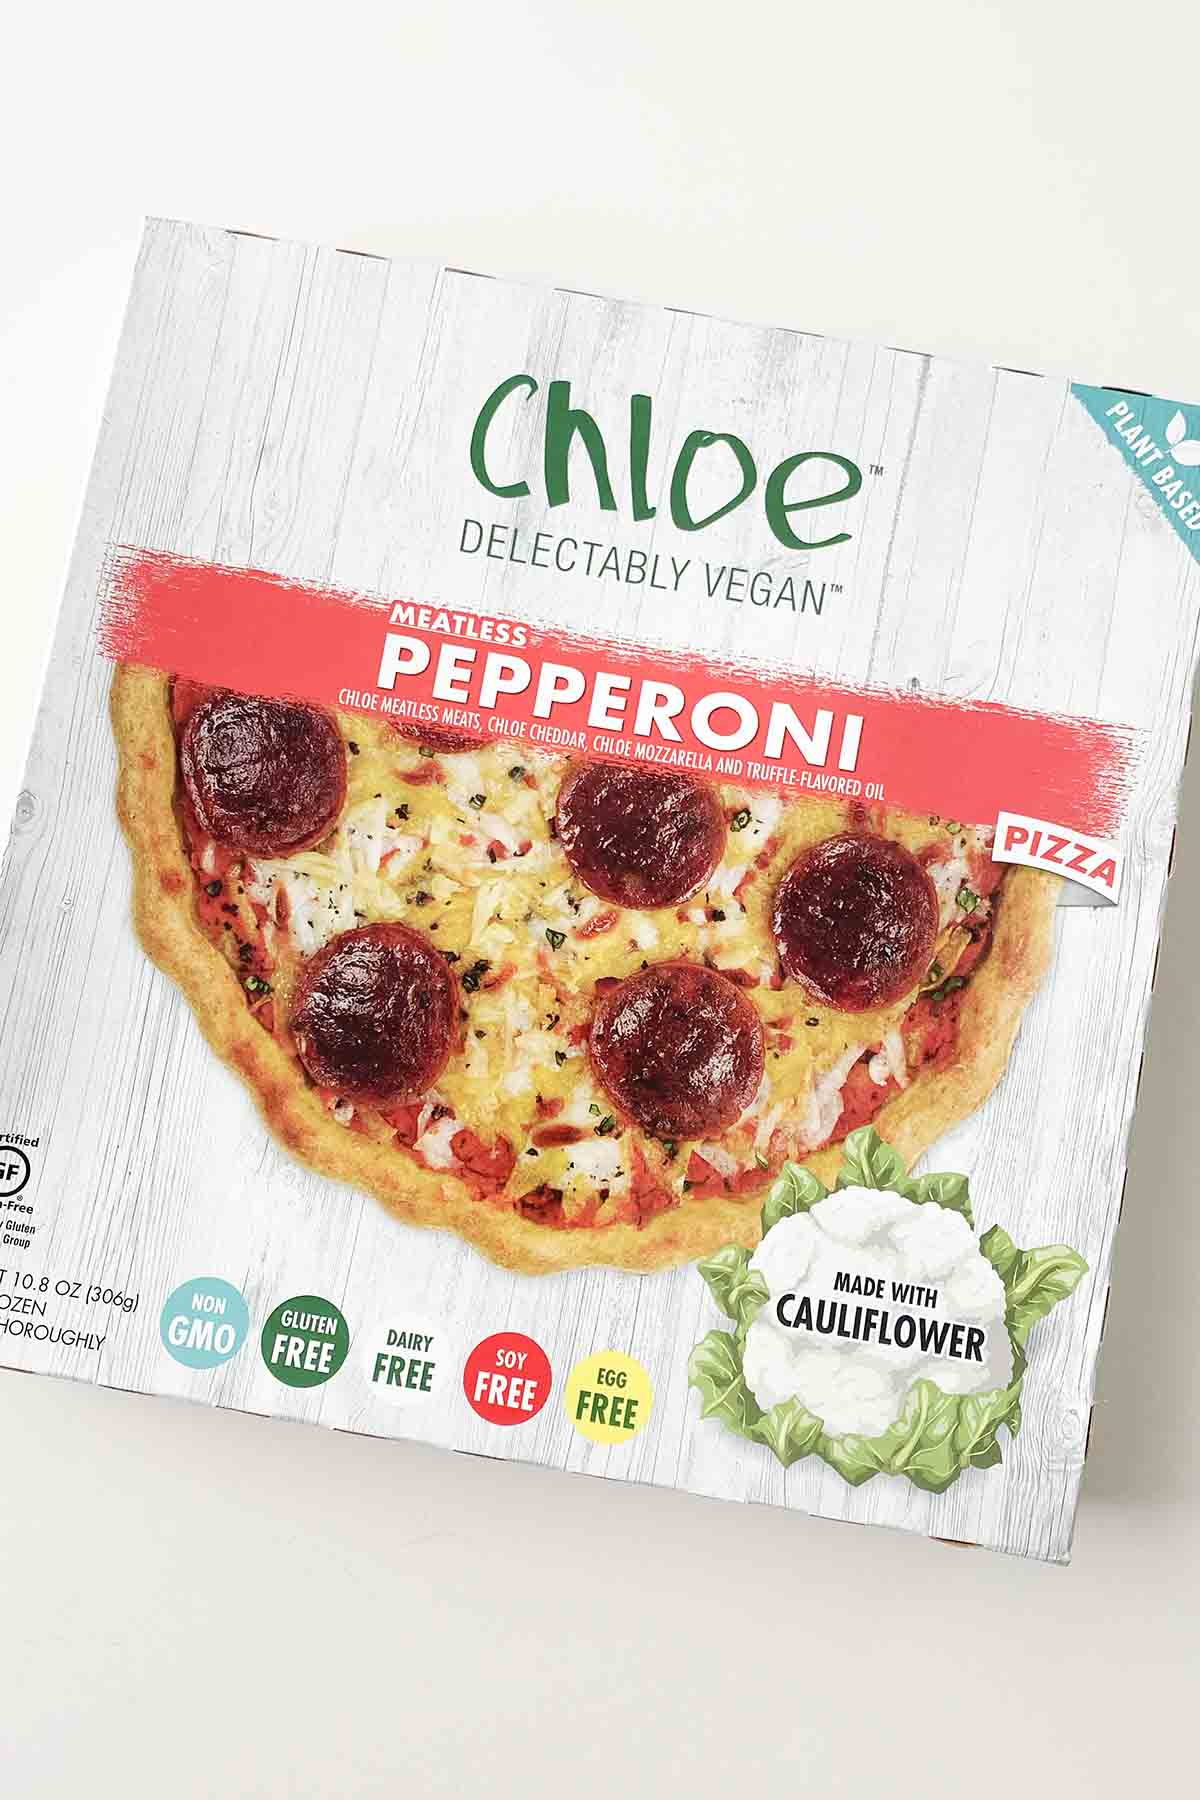 Chloe Delectably Vegan Pizza box on a white table, pepperoni variety